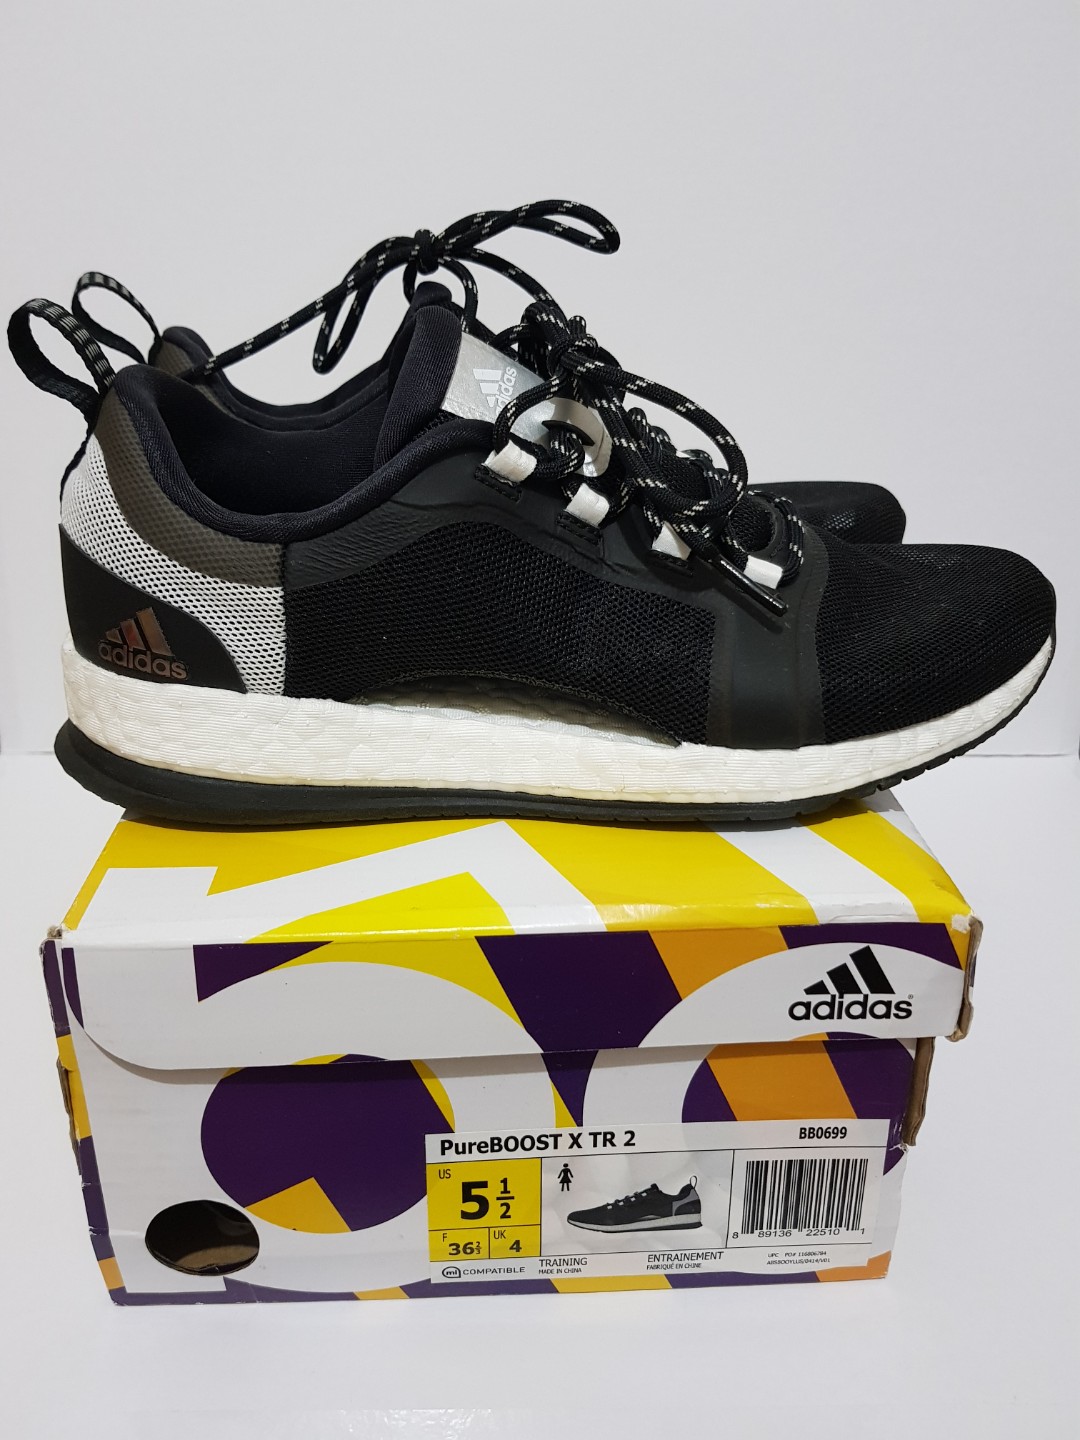 adidas pure boost xtr2 trainer